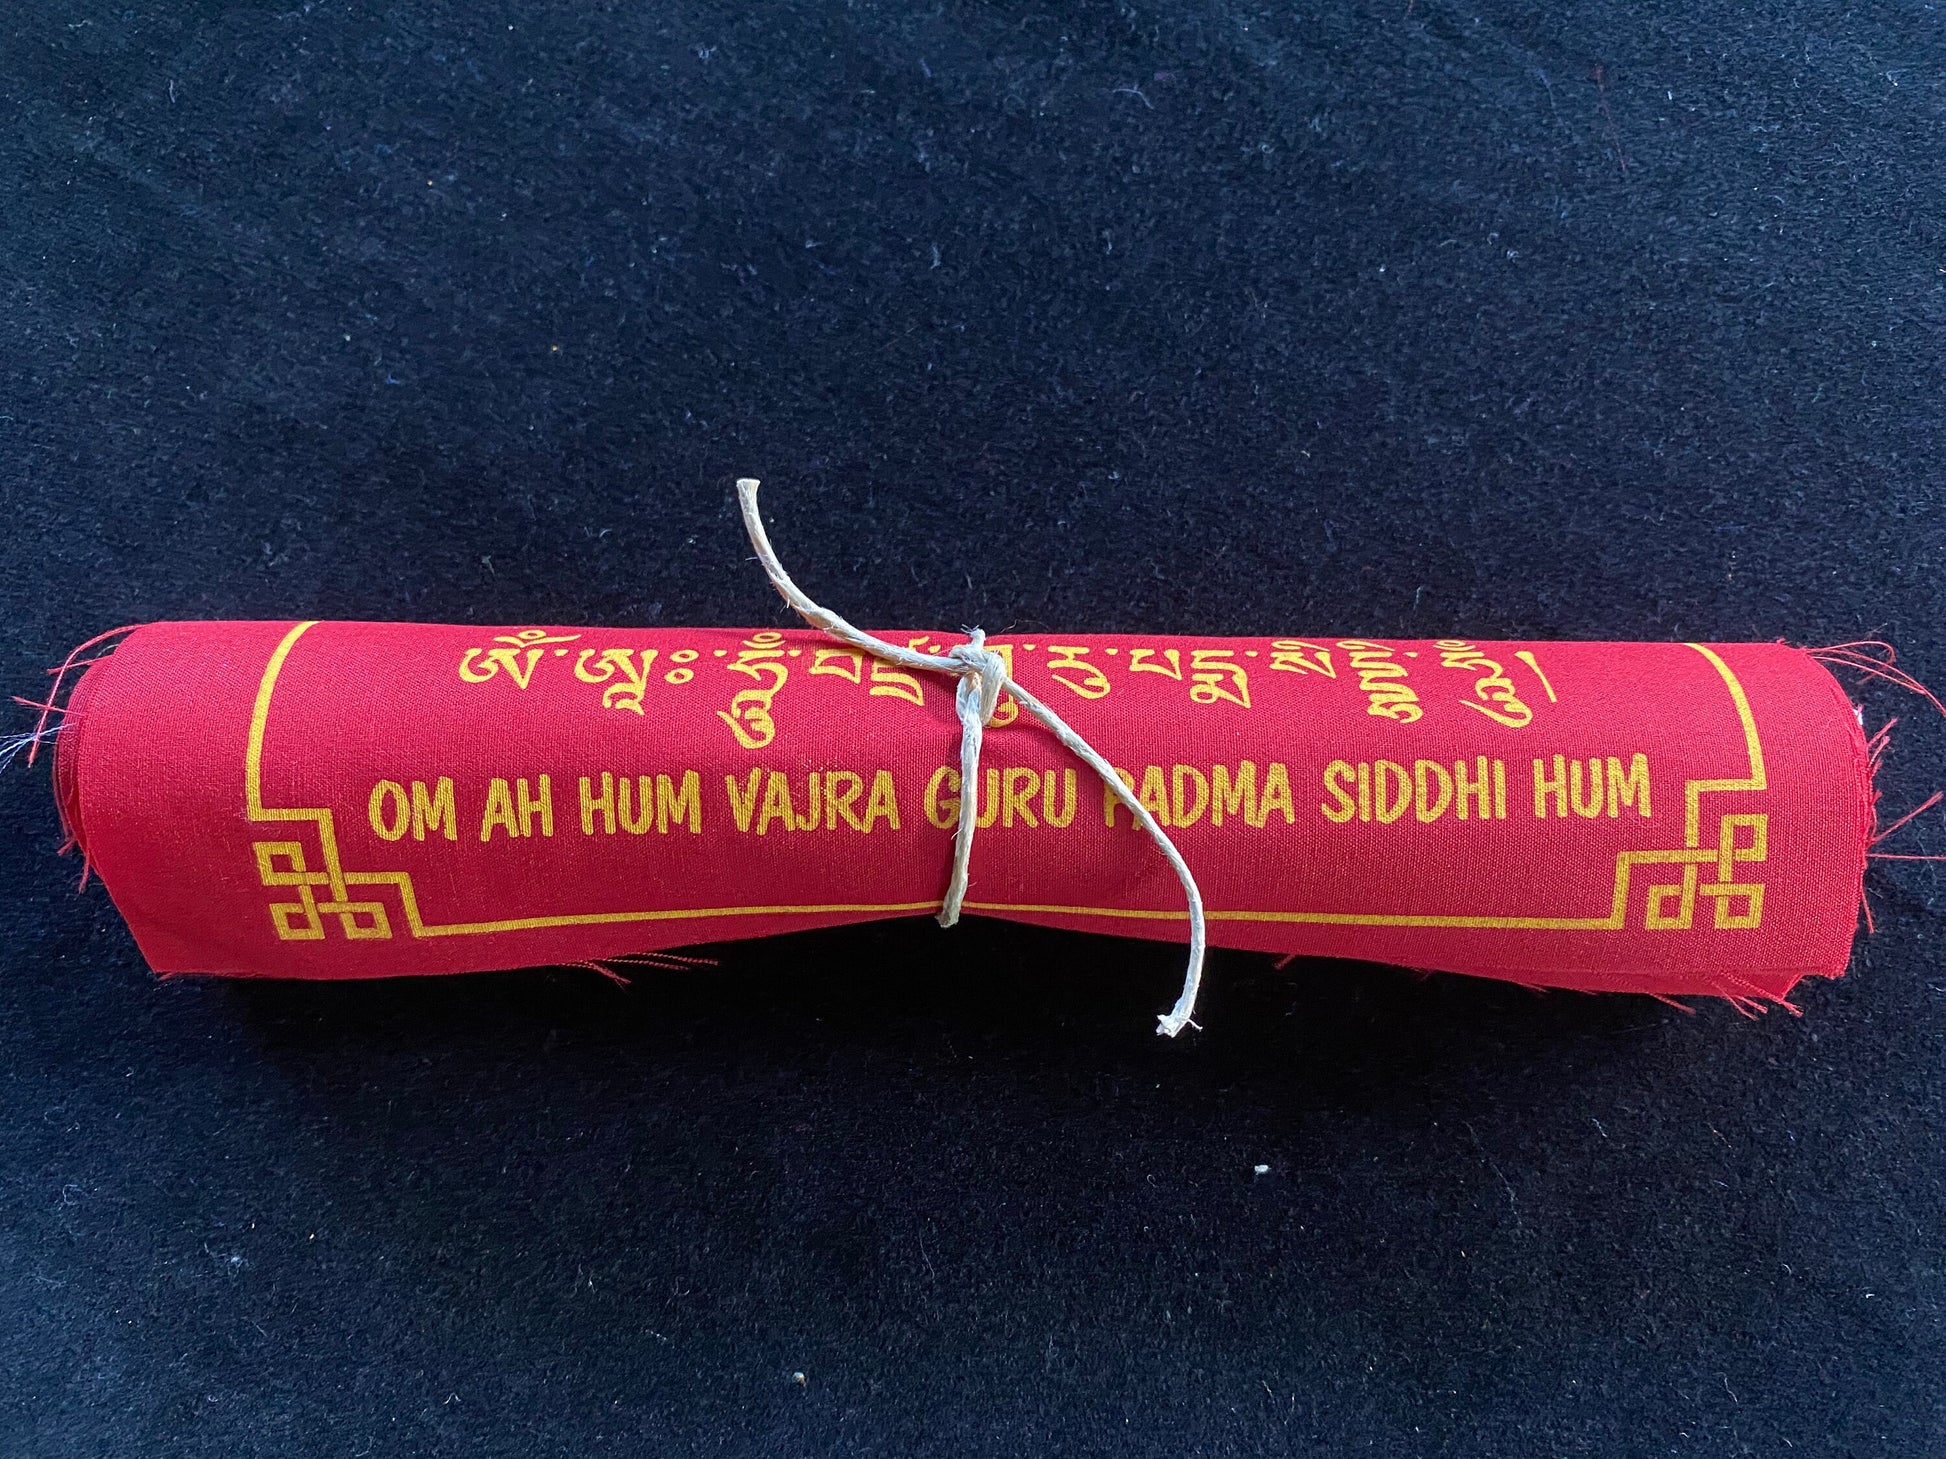 High-quality Tibetan prayer flags: Close-up of 1 rolls of 10 Guru Rinpoche flag sets, 8x8 inches each, colored red, imprinted with his image in yellow ink on a black background.